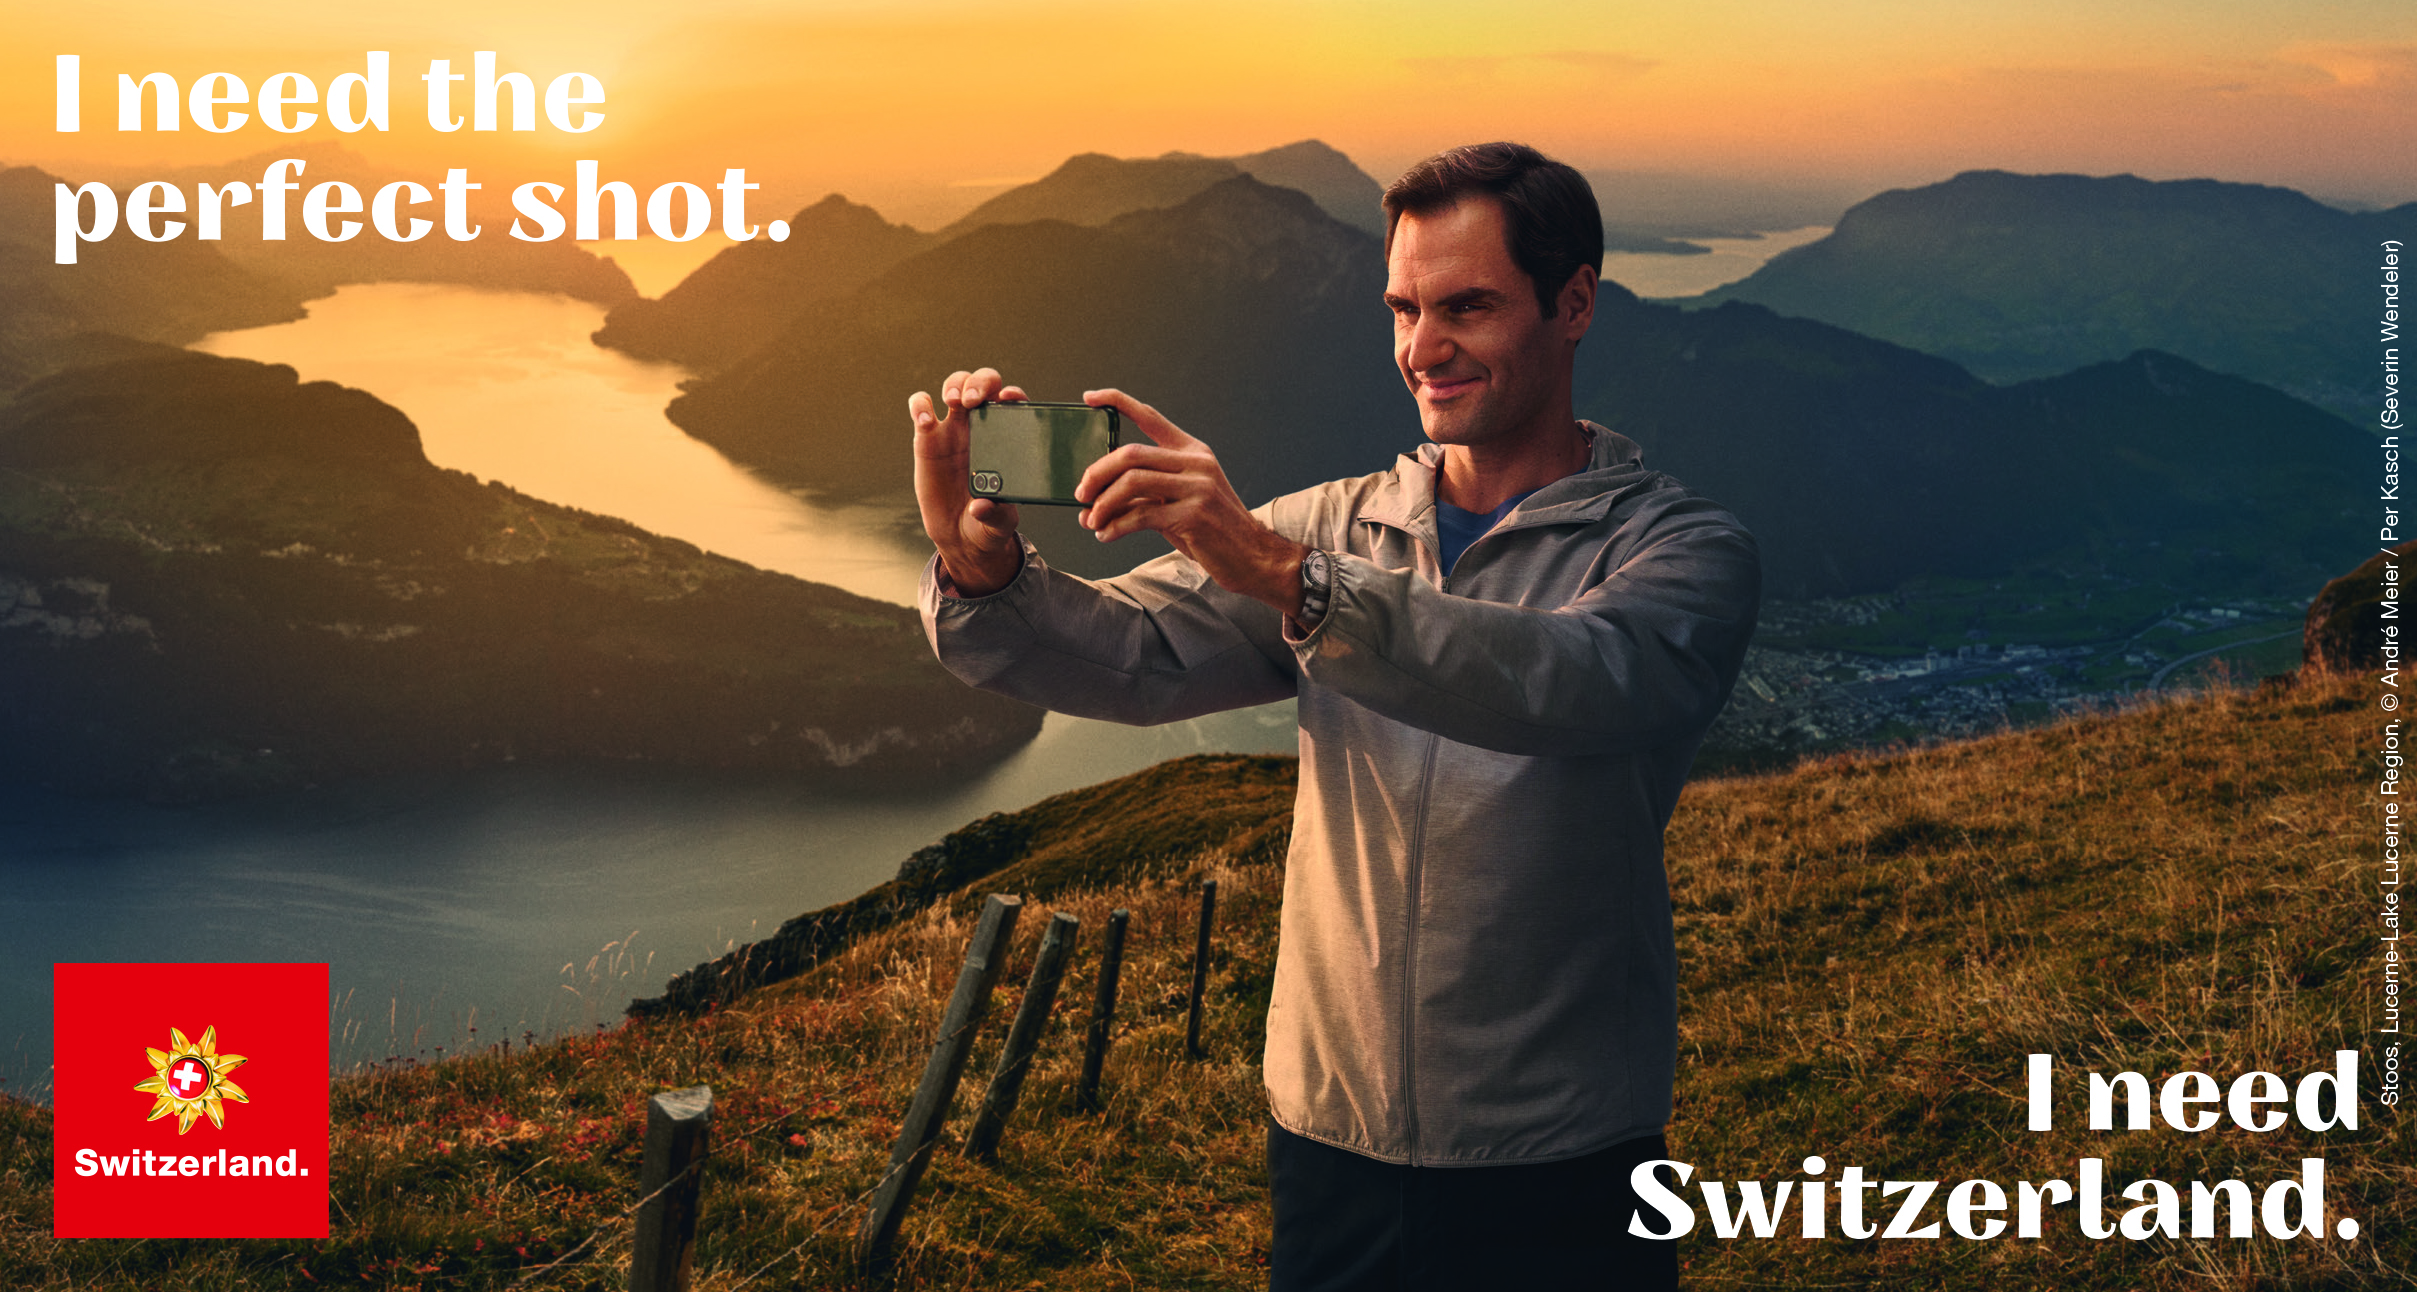 ROGER FEDERER TEAMS UP WITH SWITZERLAND TOURISM - Indian Travellers can now experience Switzerland through the eyes of Roger Federer